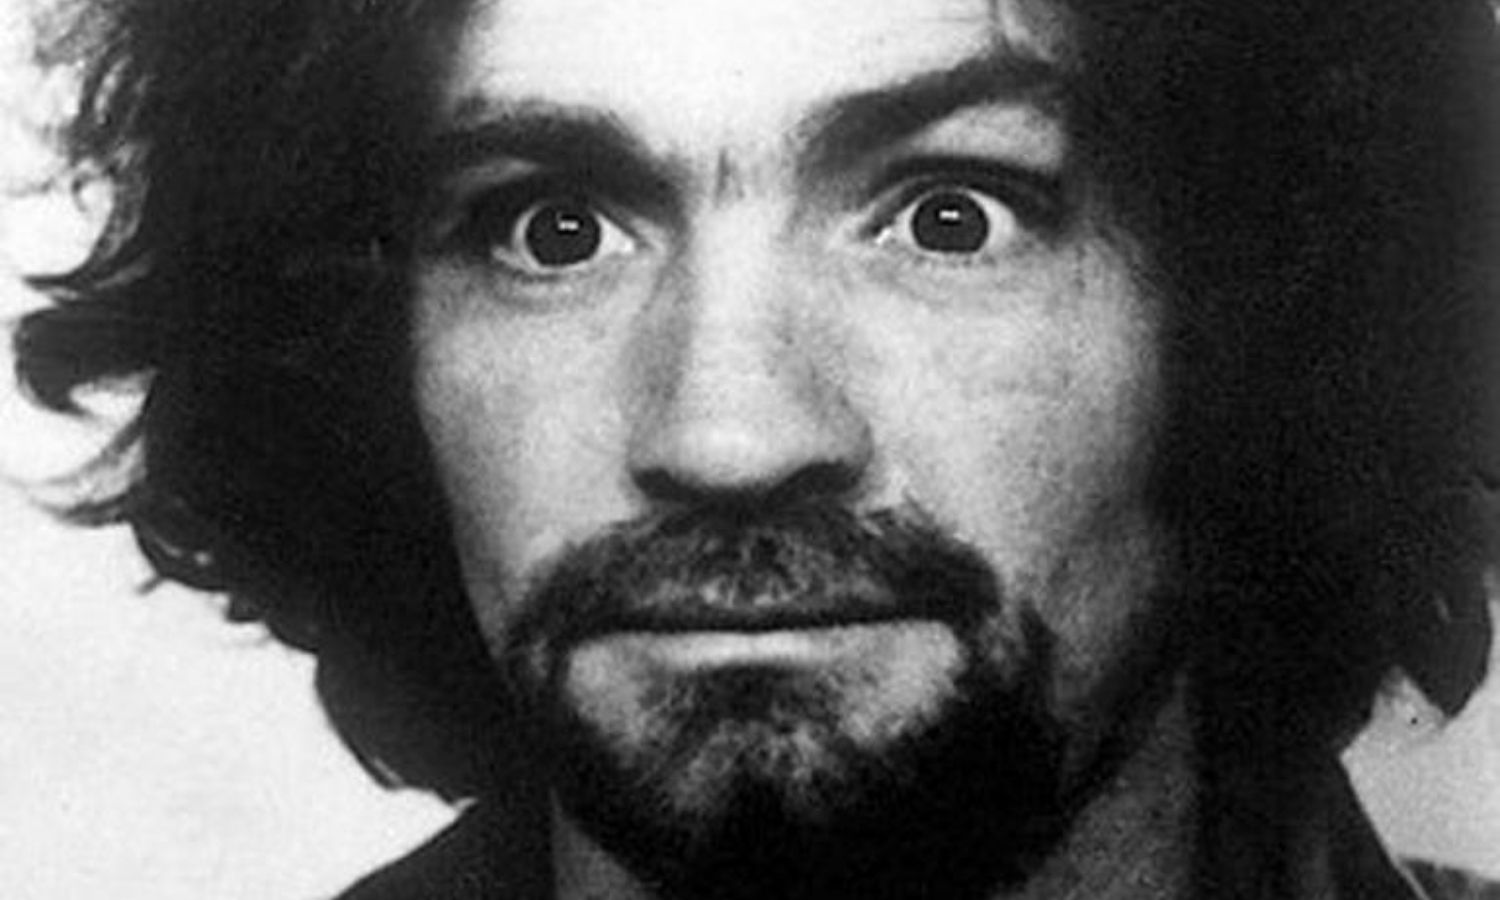 OTD in 1981: Tom Snyder interviewed notorious killer Charles Manson on NBC's Tomorrow Coast to Coast show.